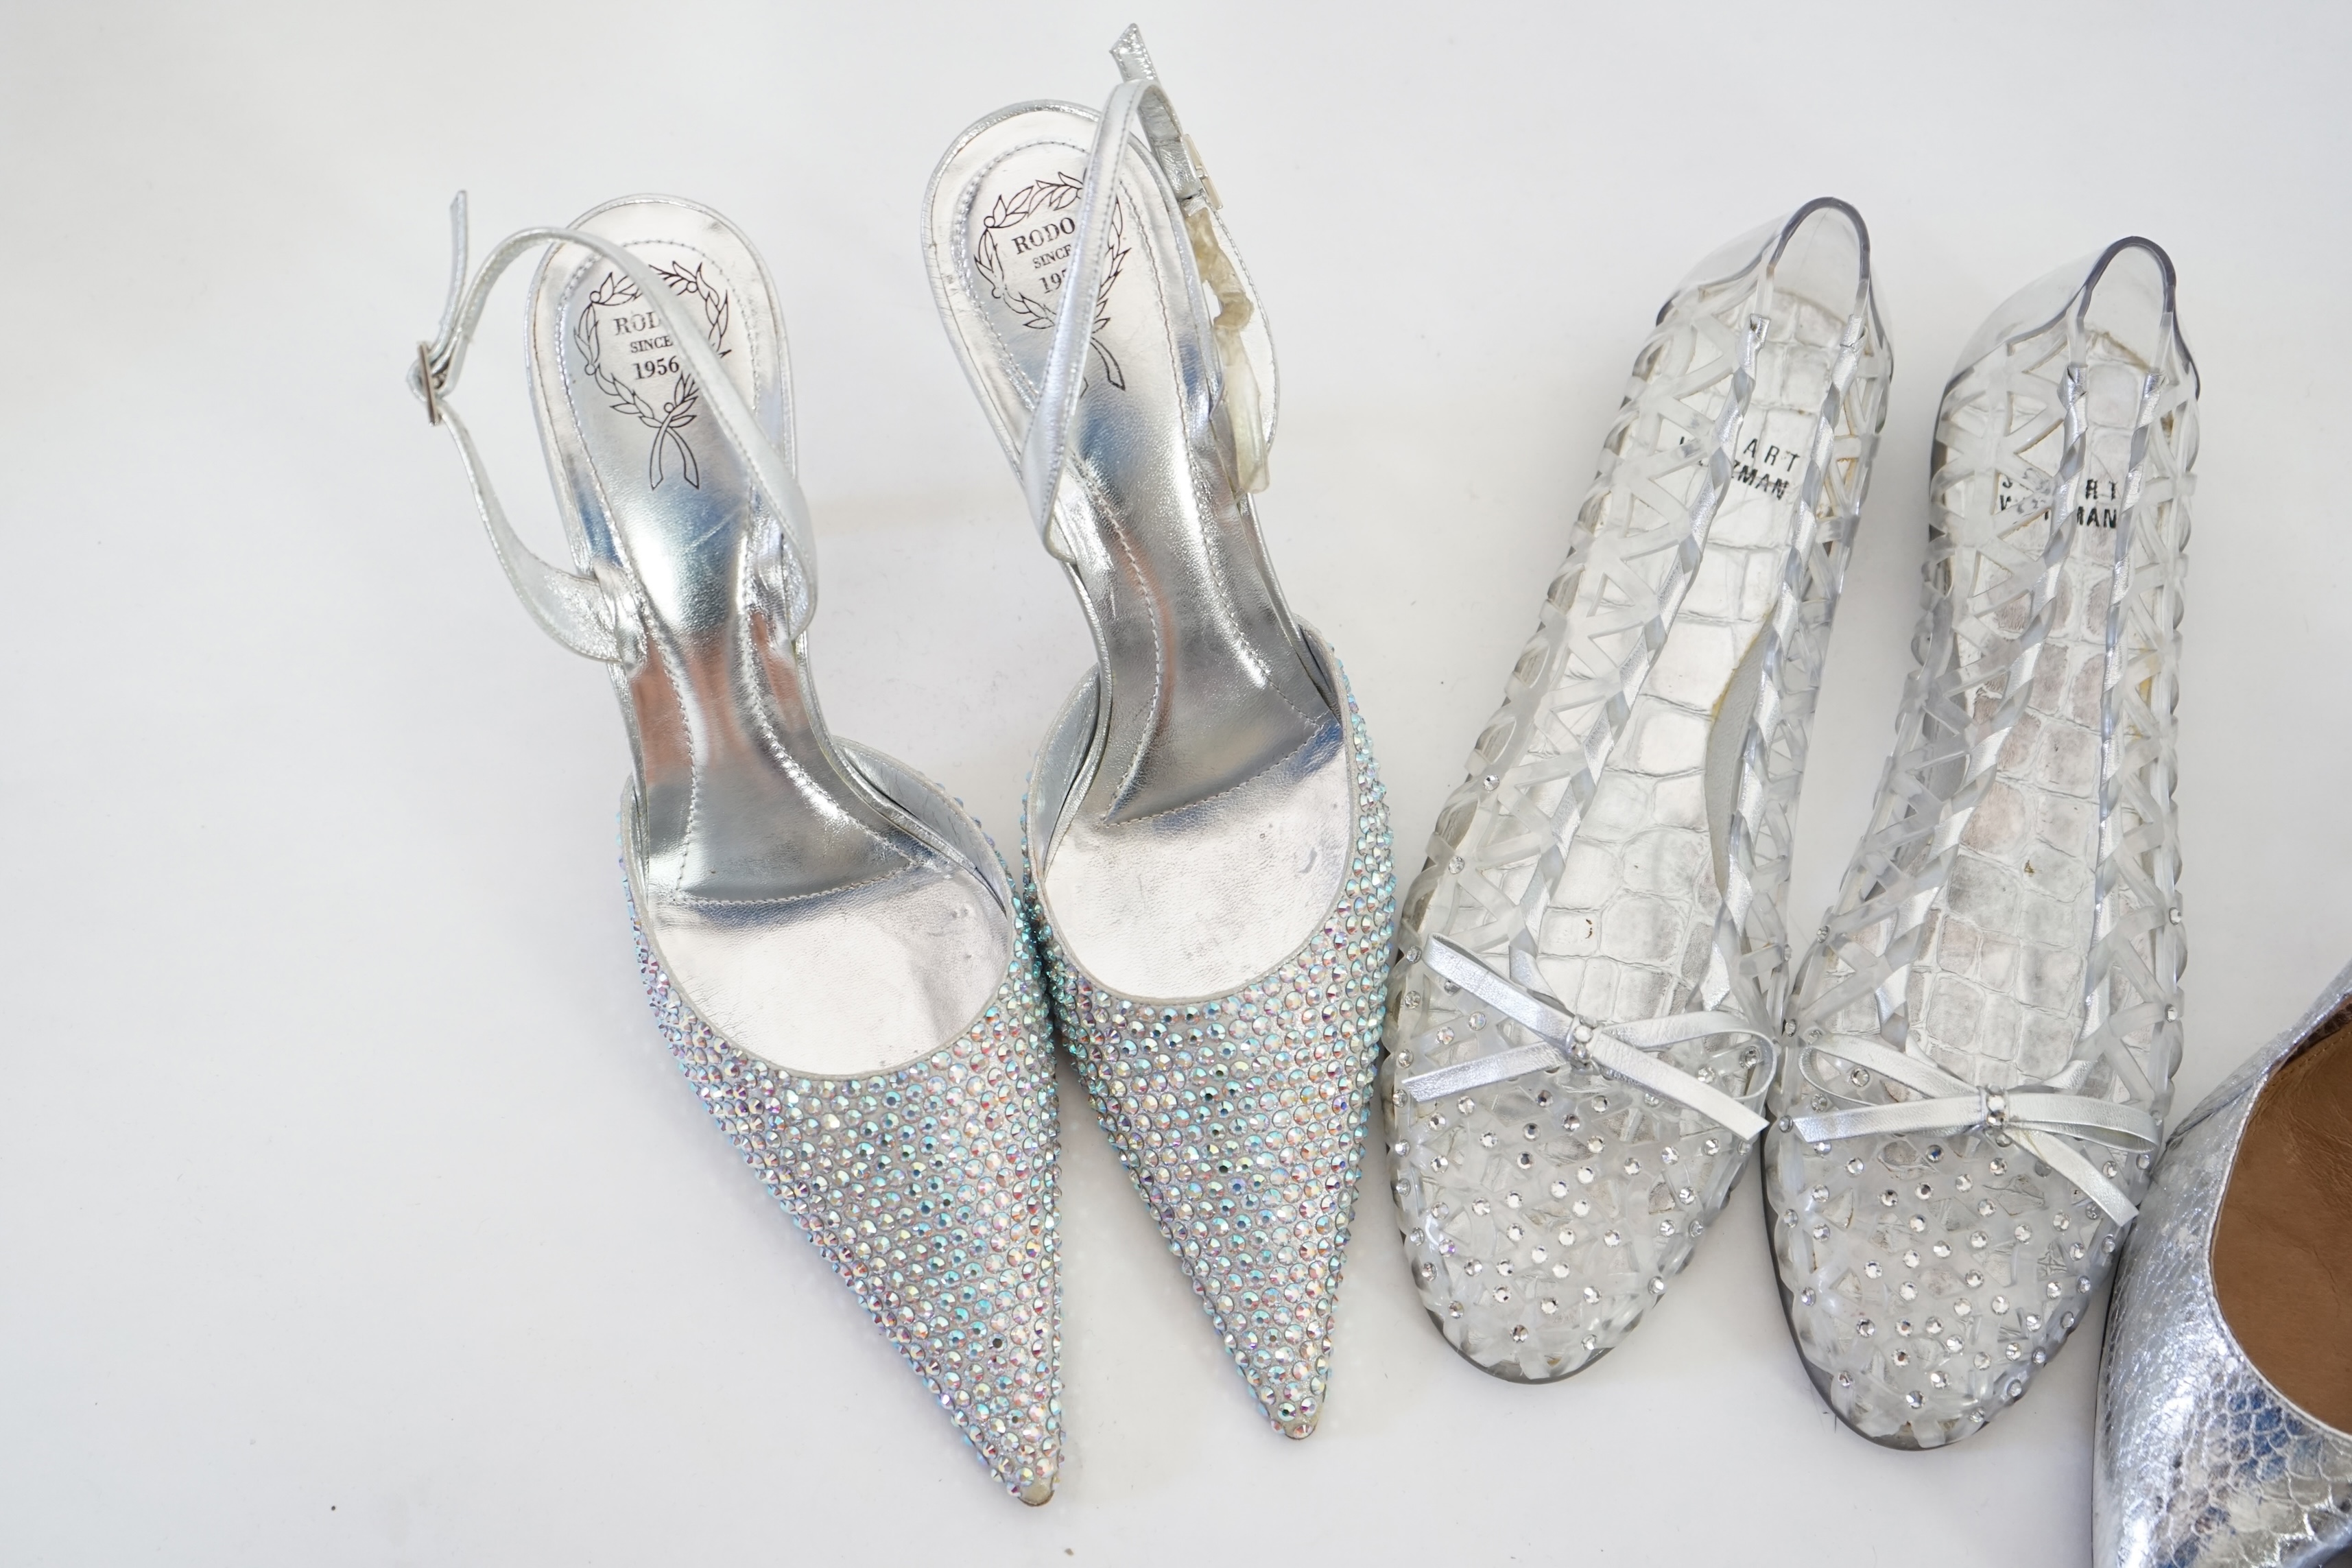 Three pairs of lady's silver shoes: Rodo silver diamonté sling back heels, Moda in Pelle silver snakeskin pattern heeled pumps and a pair of Stuart Weitzman clear jelly's with crystals. Size 38.5 (UK 4). Proceeds to Happ